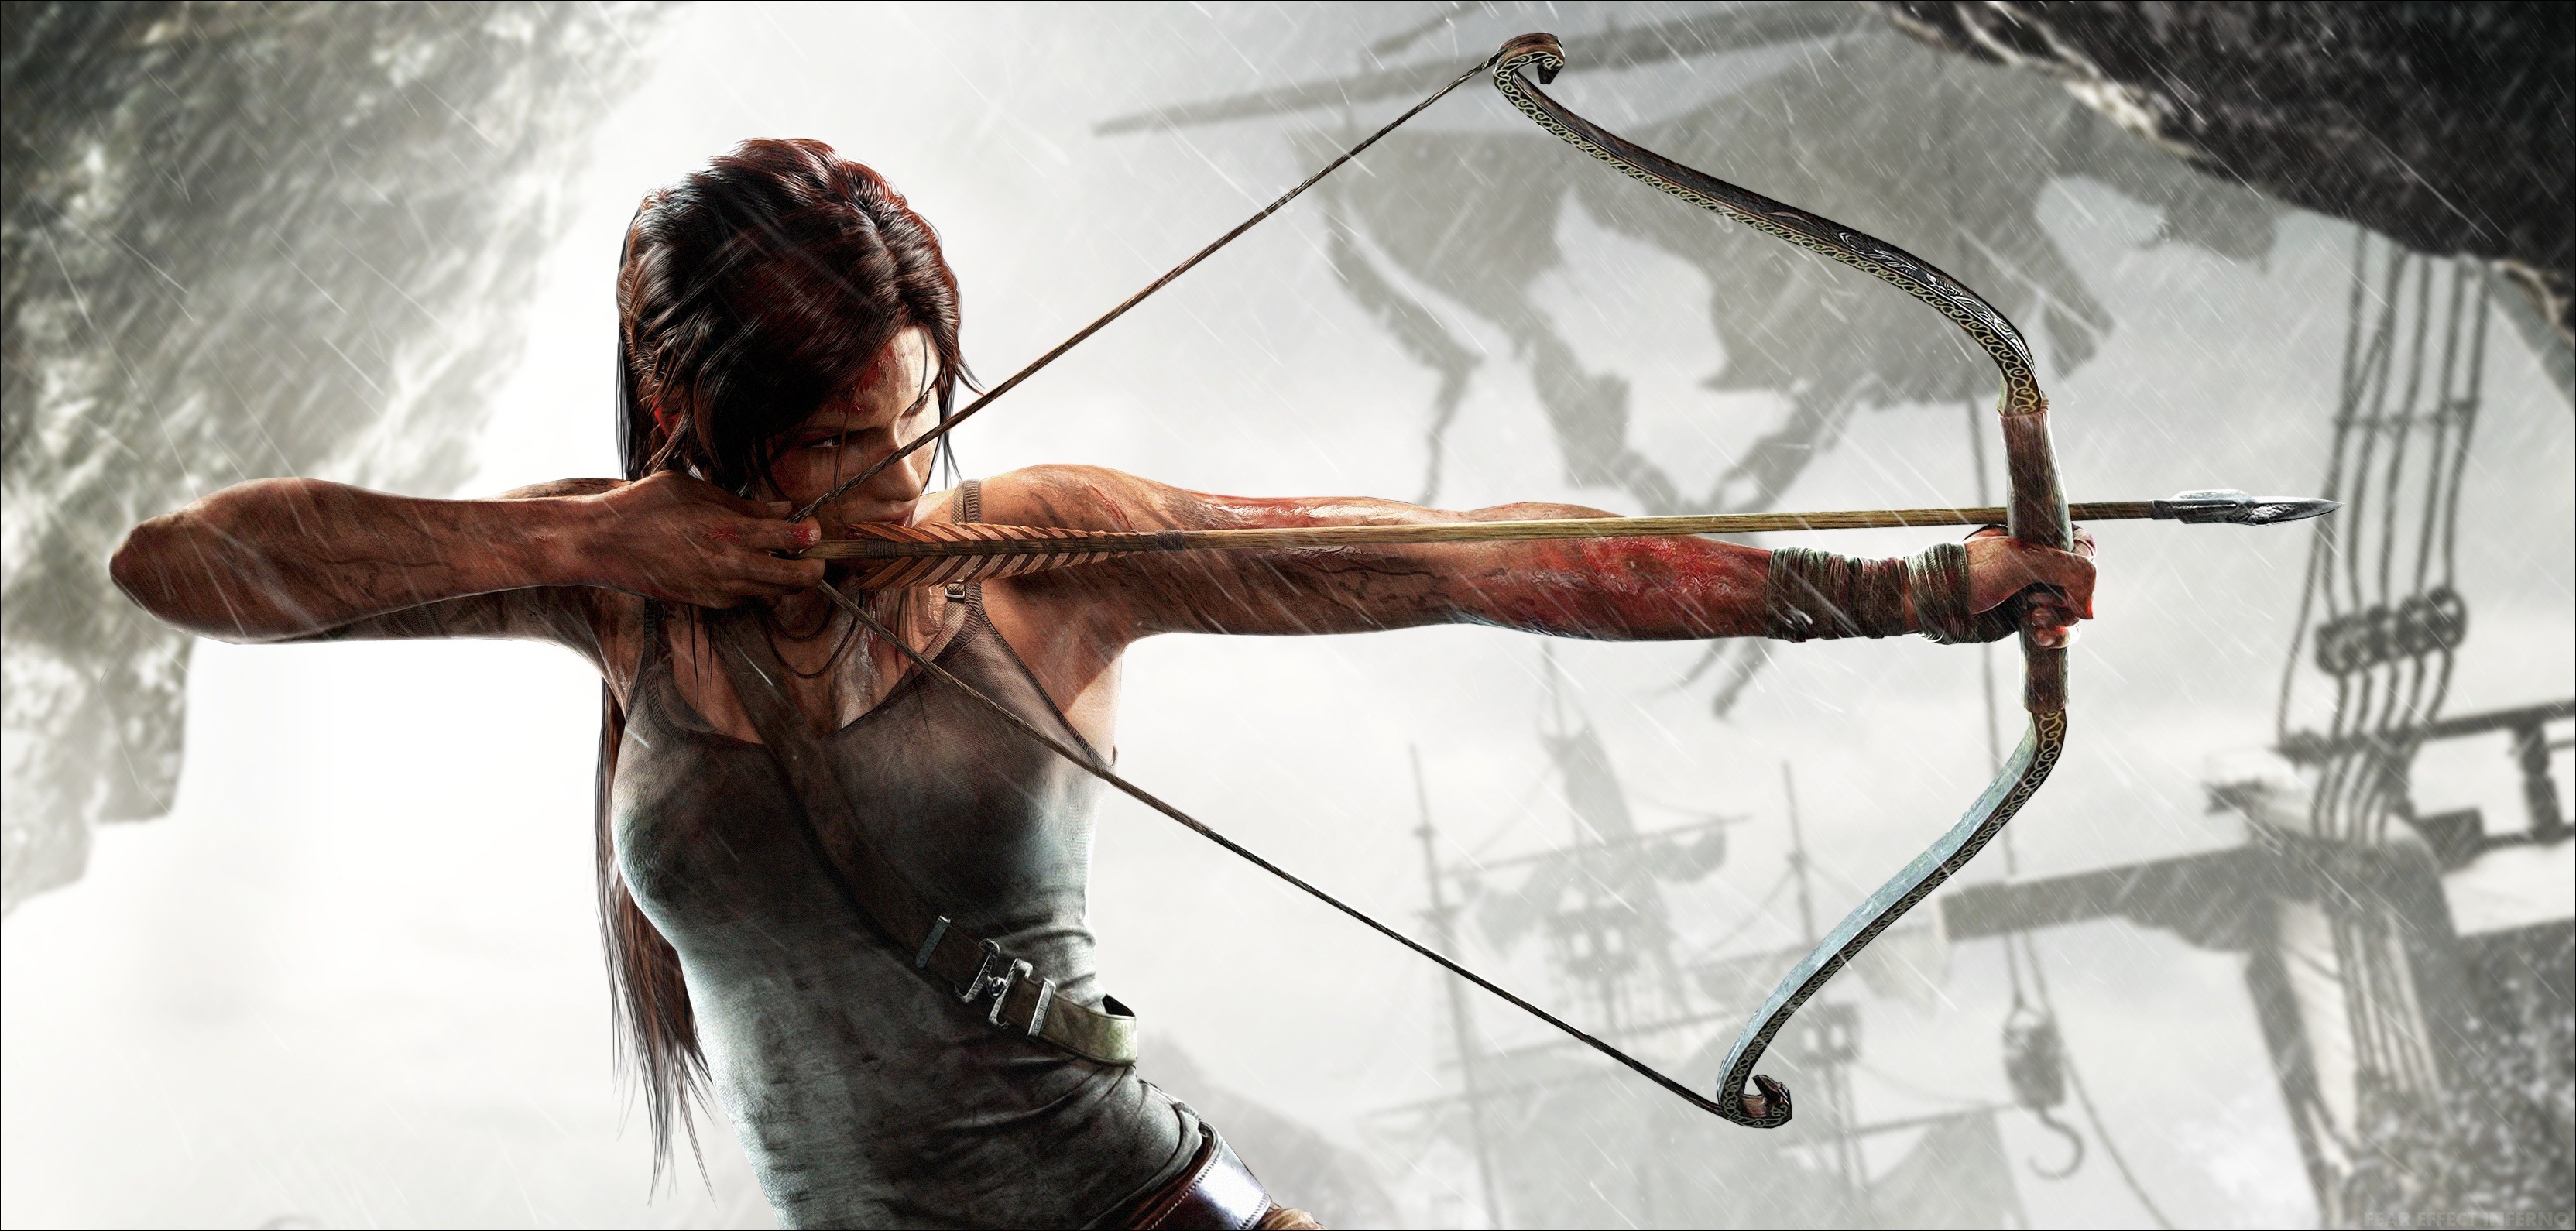 General 3327x1590 video games Tomb Raider video game art bow wounds blood video game girls weapon arrows aiming long hair Lara Croft (Tomb Raider) video game characters bow and arrow